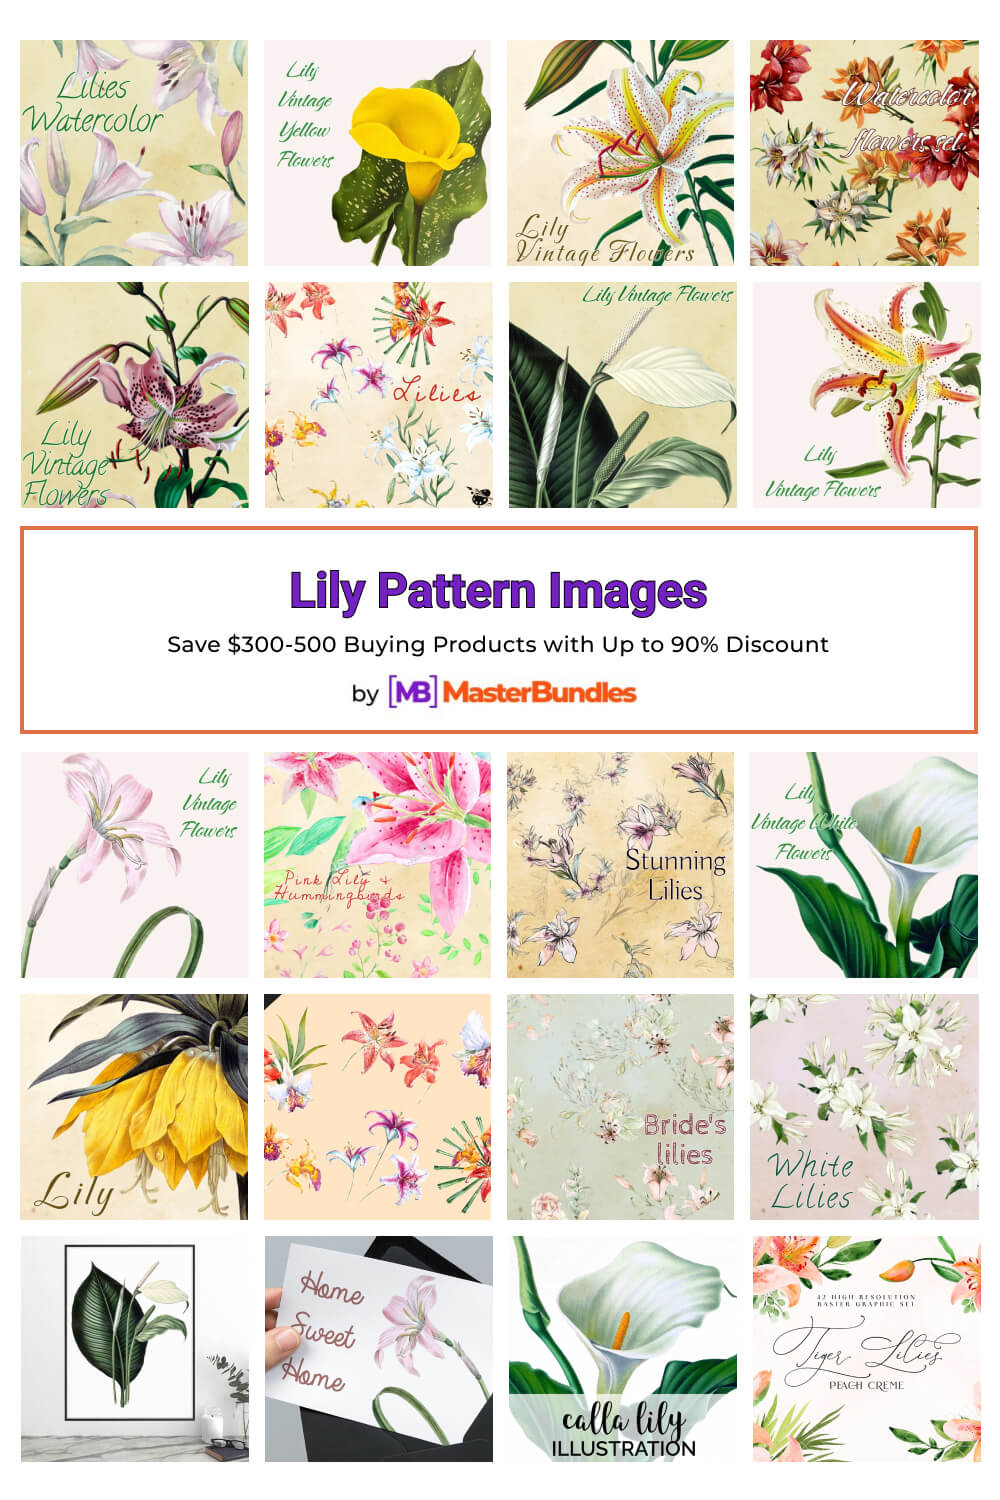 lily pattern images pinterest image.